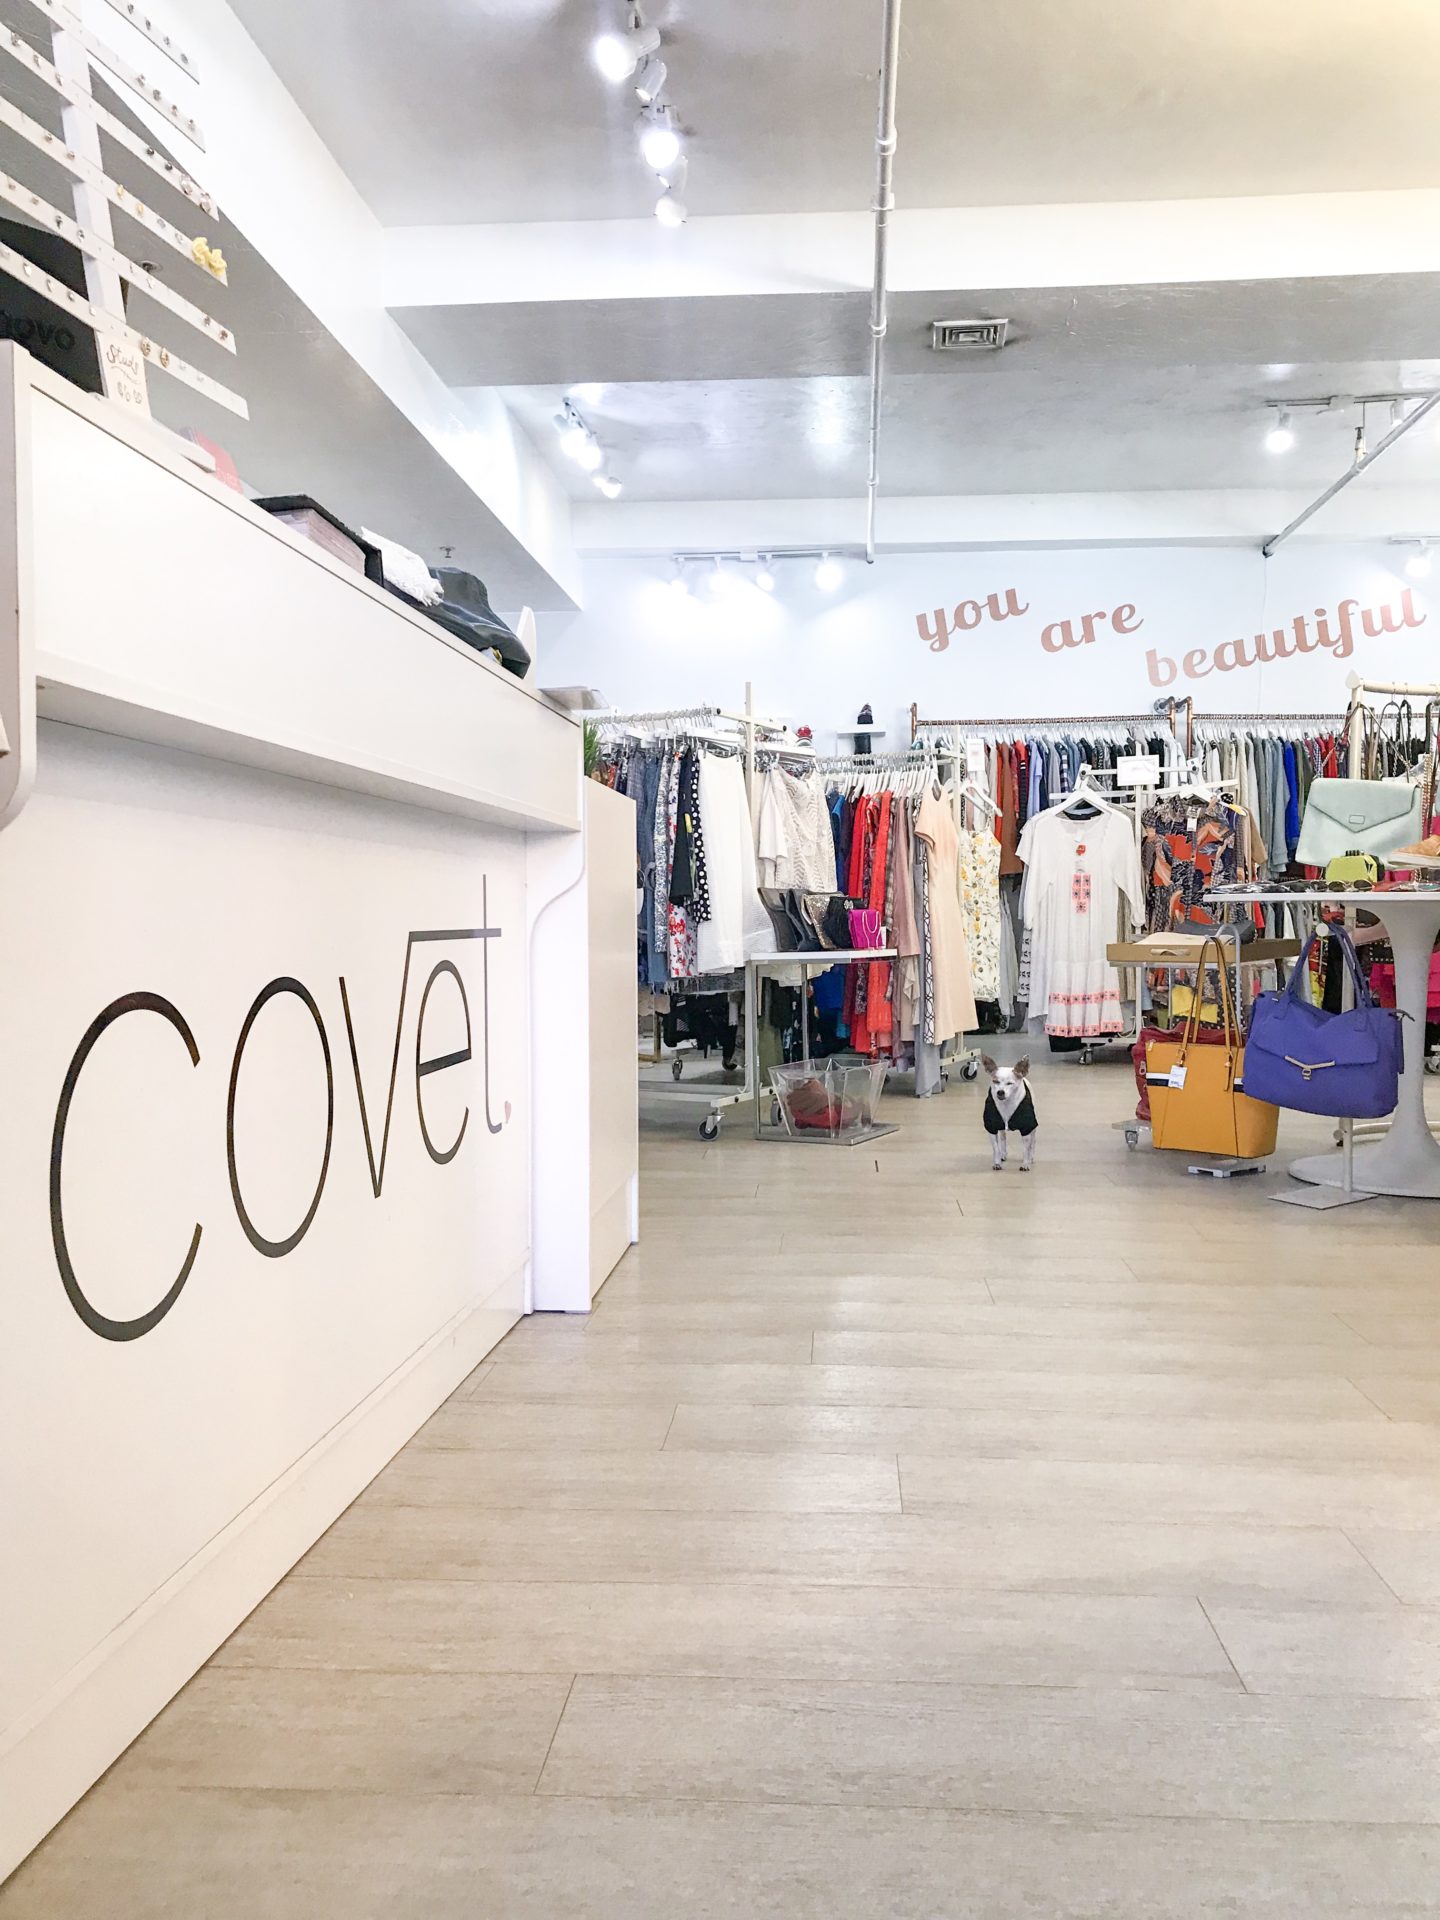 consignment shopping with covet boston, found a NWT self portrait skirt!